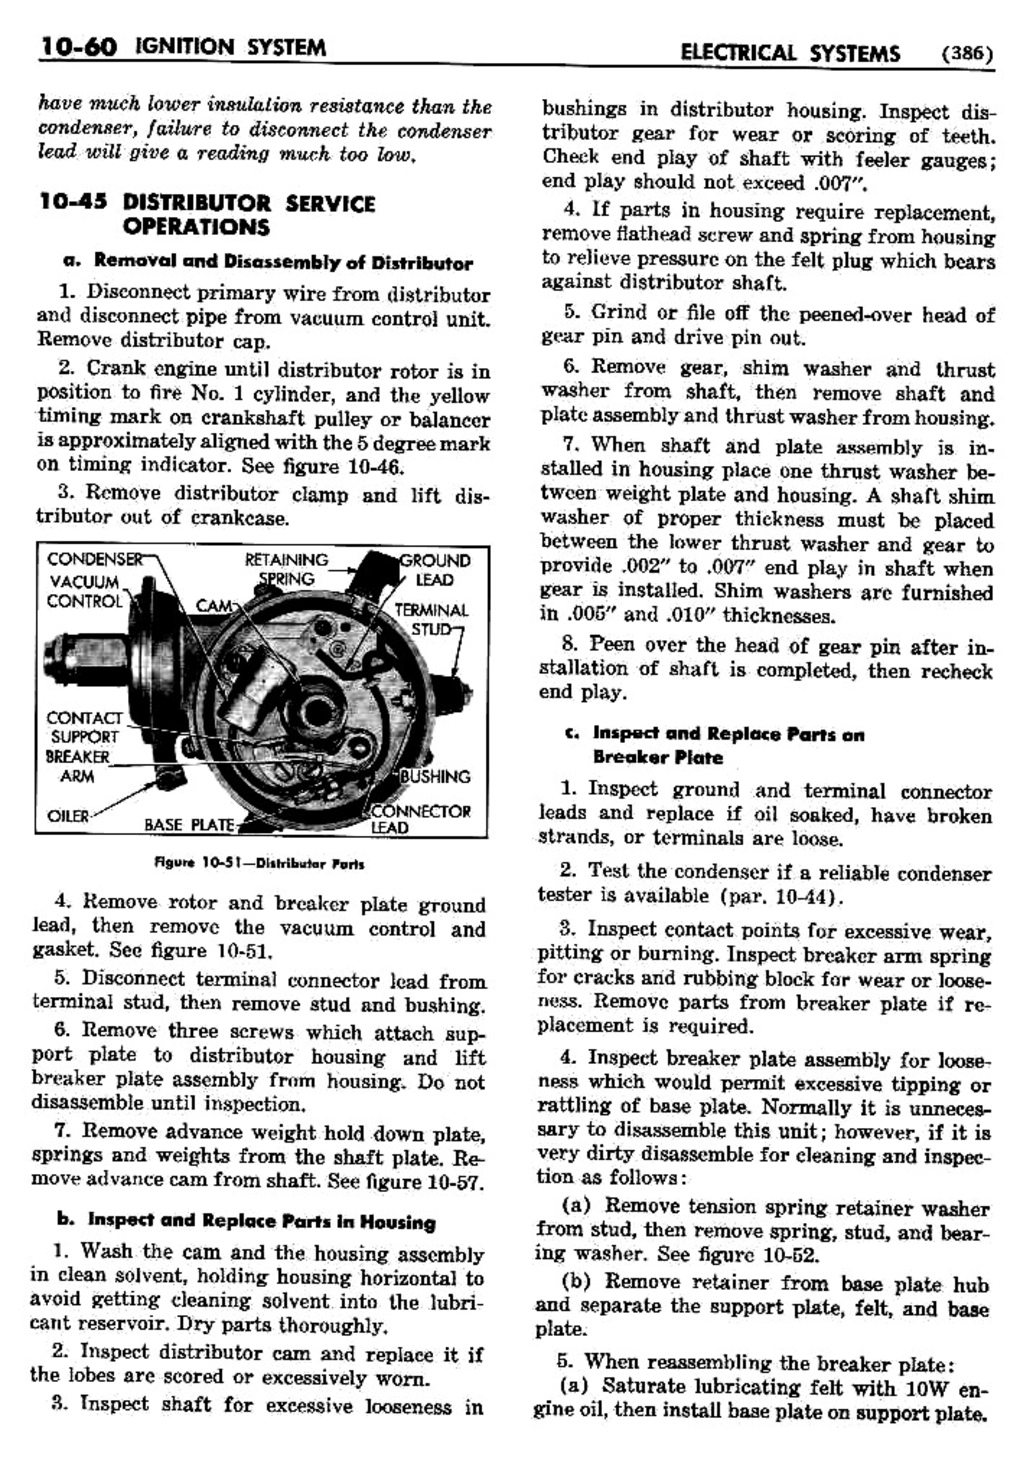 n_11 1956 Buick Shop Manual - Electrical Systems-060-060.jpg